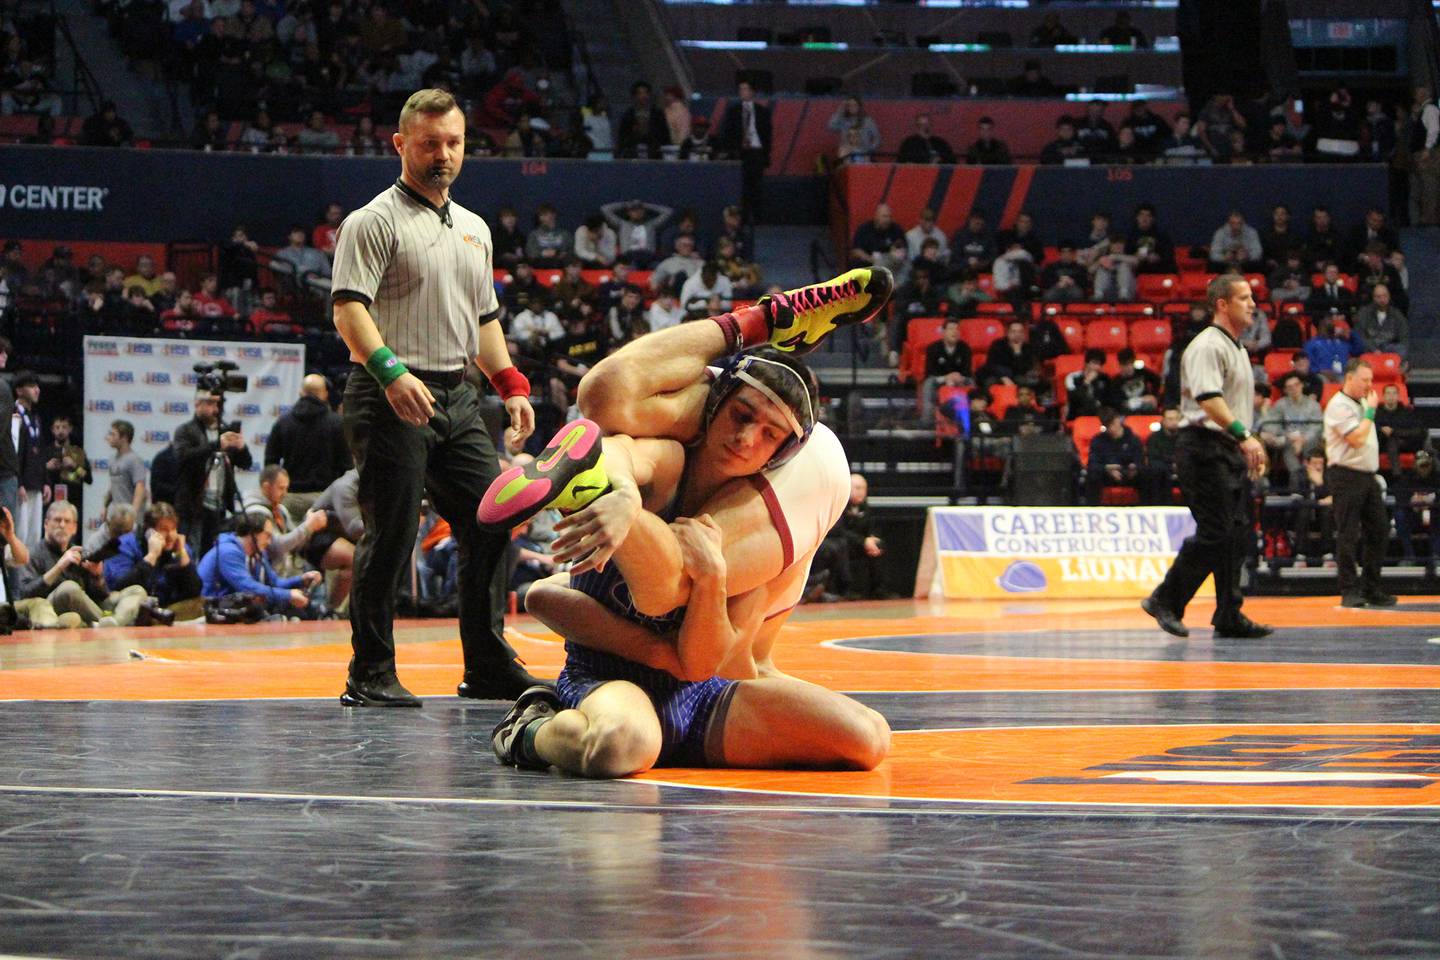 Newman's Carter Rude flips over Benton's Mason Tieffel in their 138-pound title bout at the IHSA Individual State Finals on Saturday, Feb. 18, 2023 at State Farm Center in Champaign.